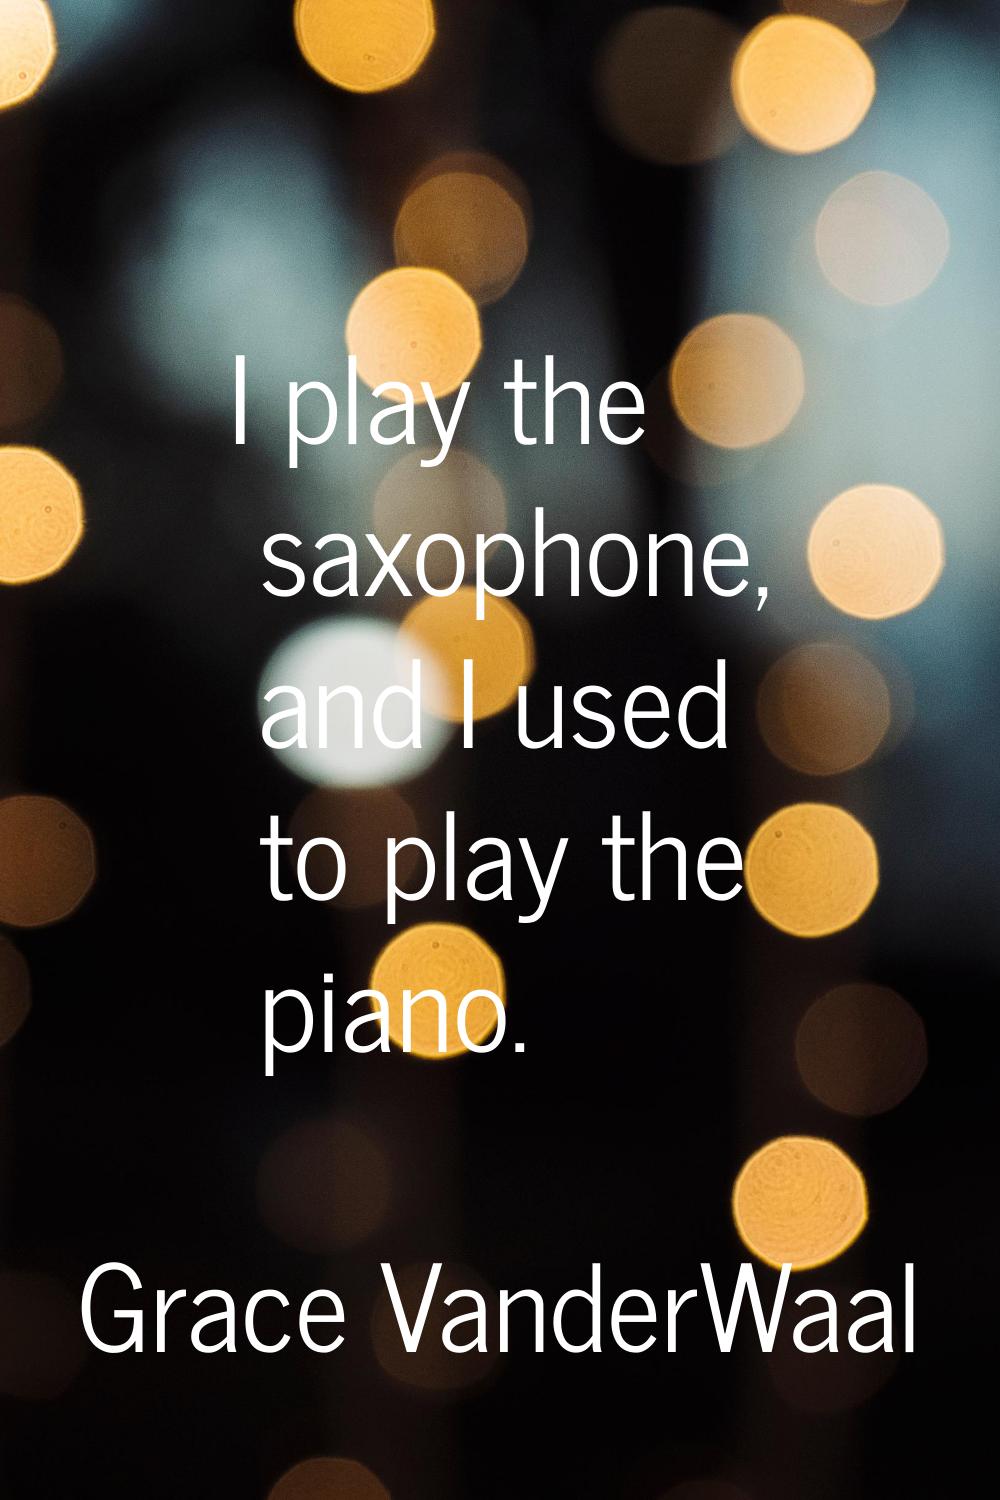 I play the saxophone, and I used to play the piano.